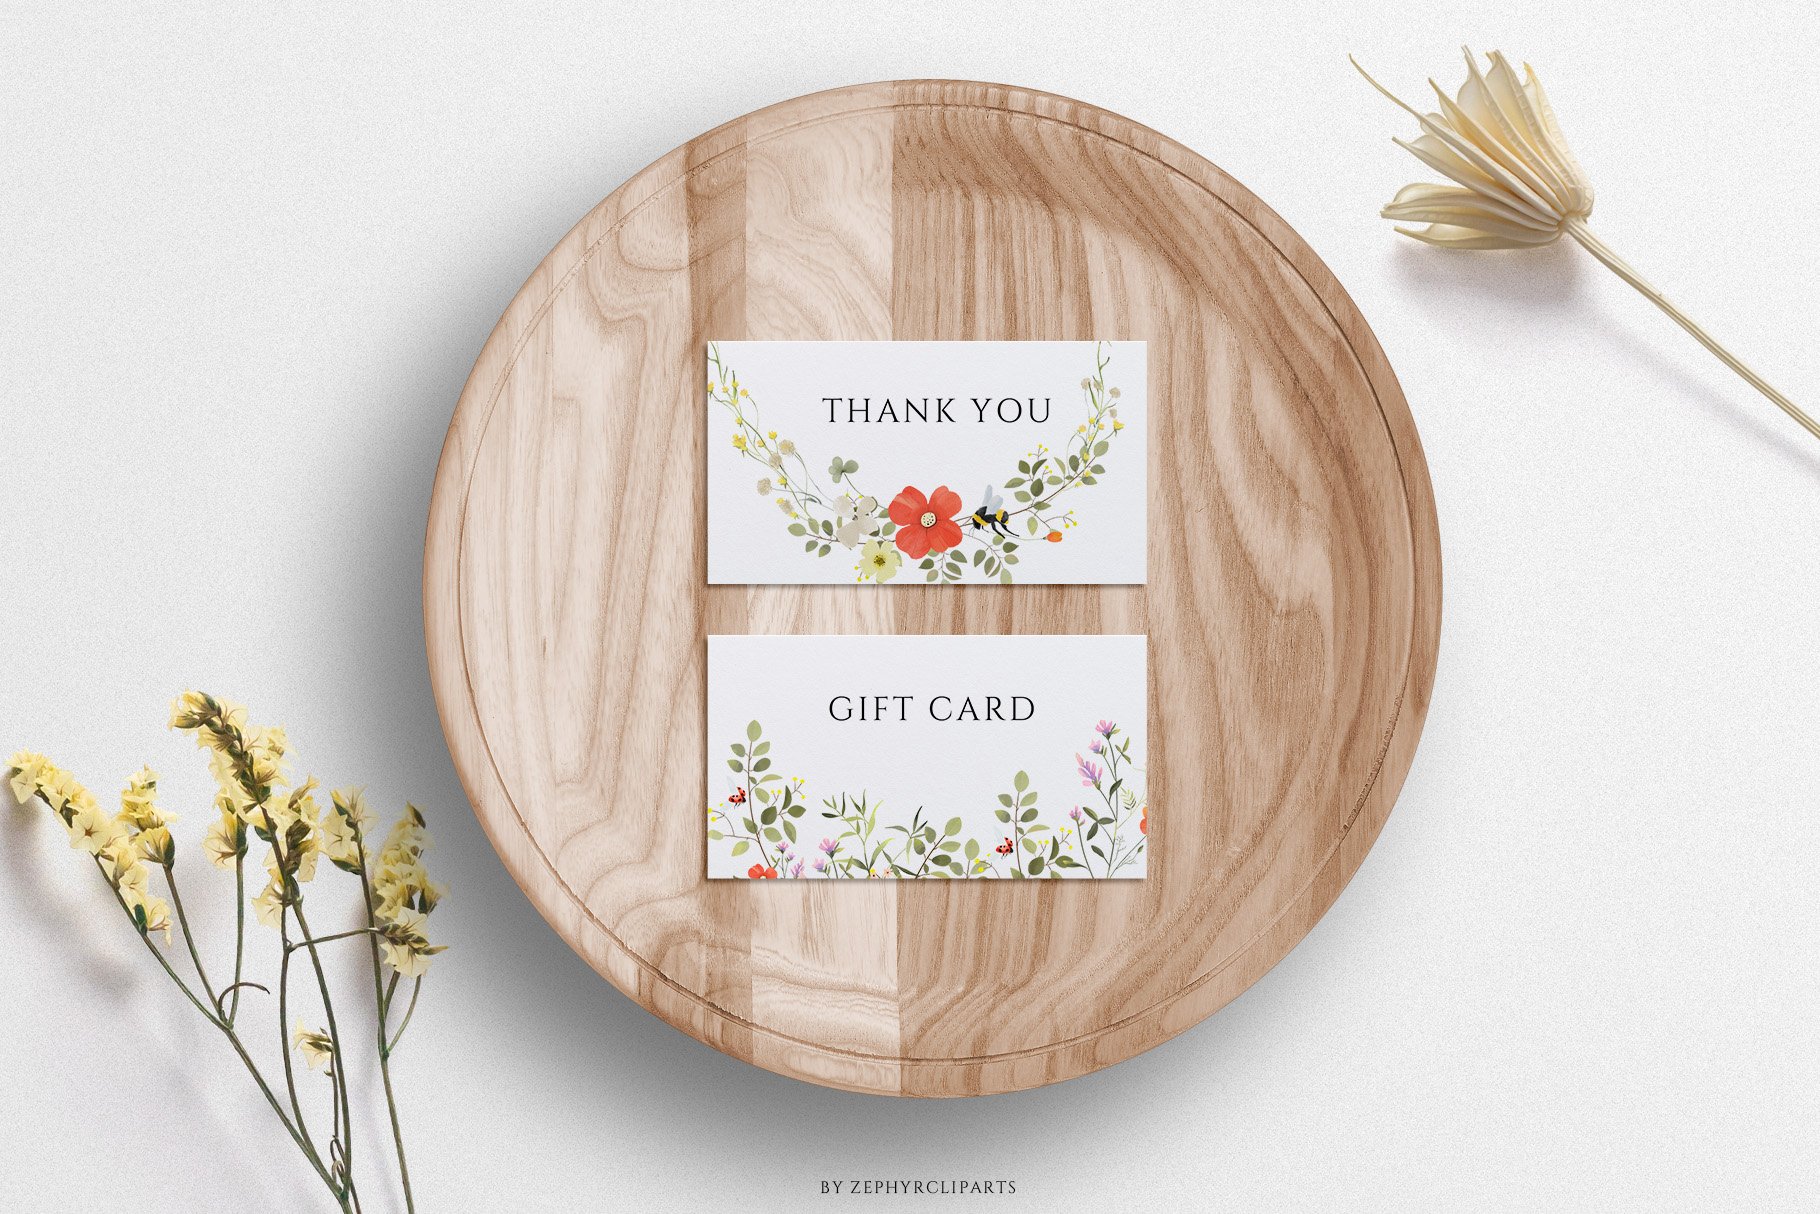 10ct Watercolor Encouragement Cards, Wildflowers Card Assortment